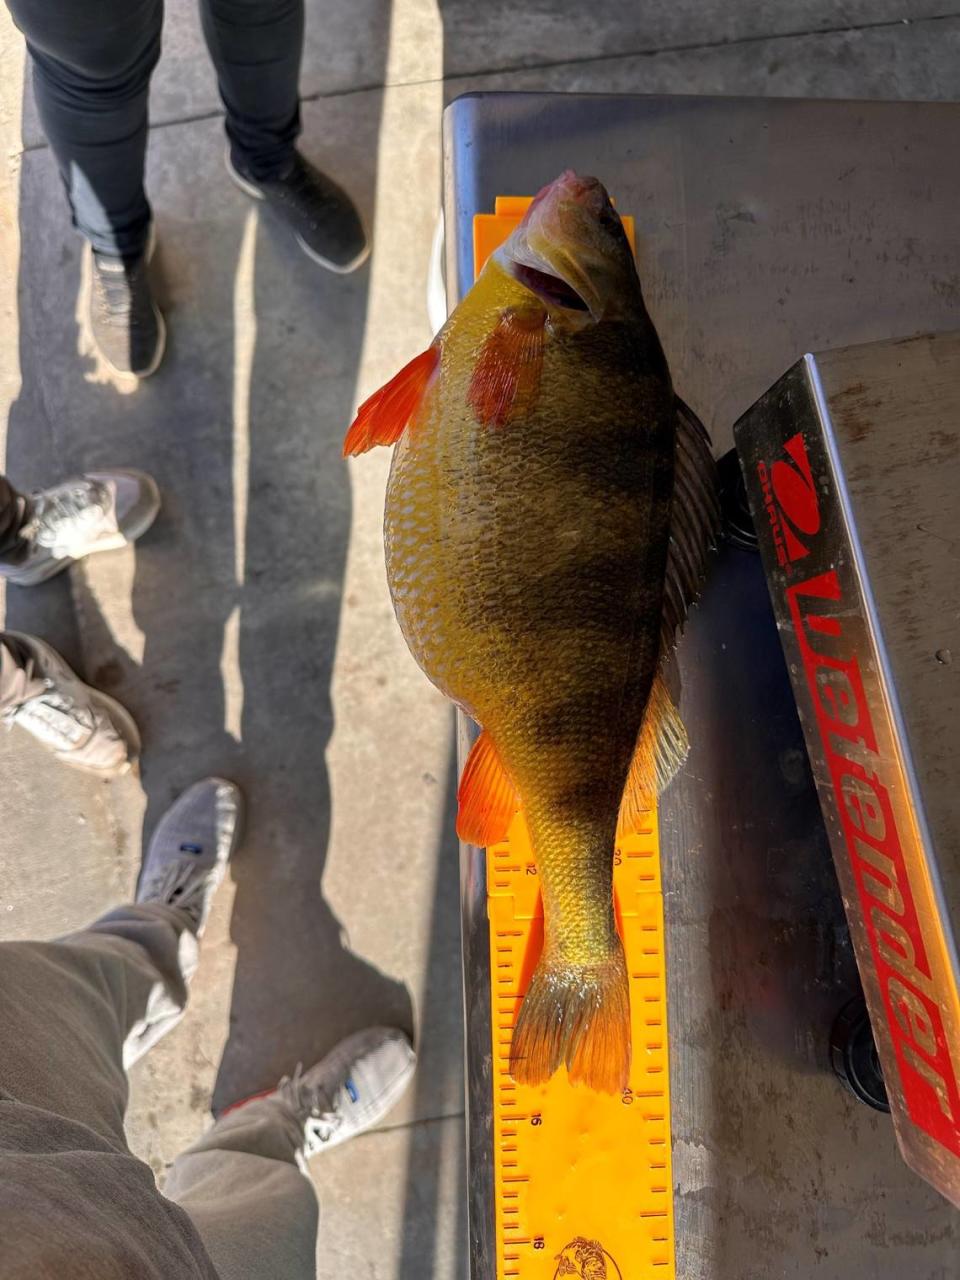 The angler got “really excited” when he realized it was a yellow perch, according to the department. Georgia Department of Natural Resources